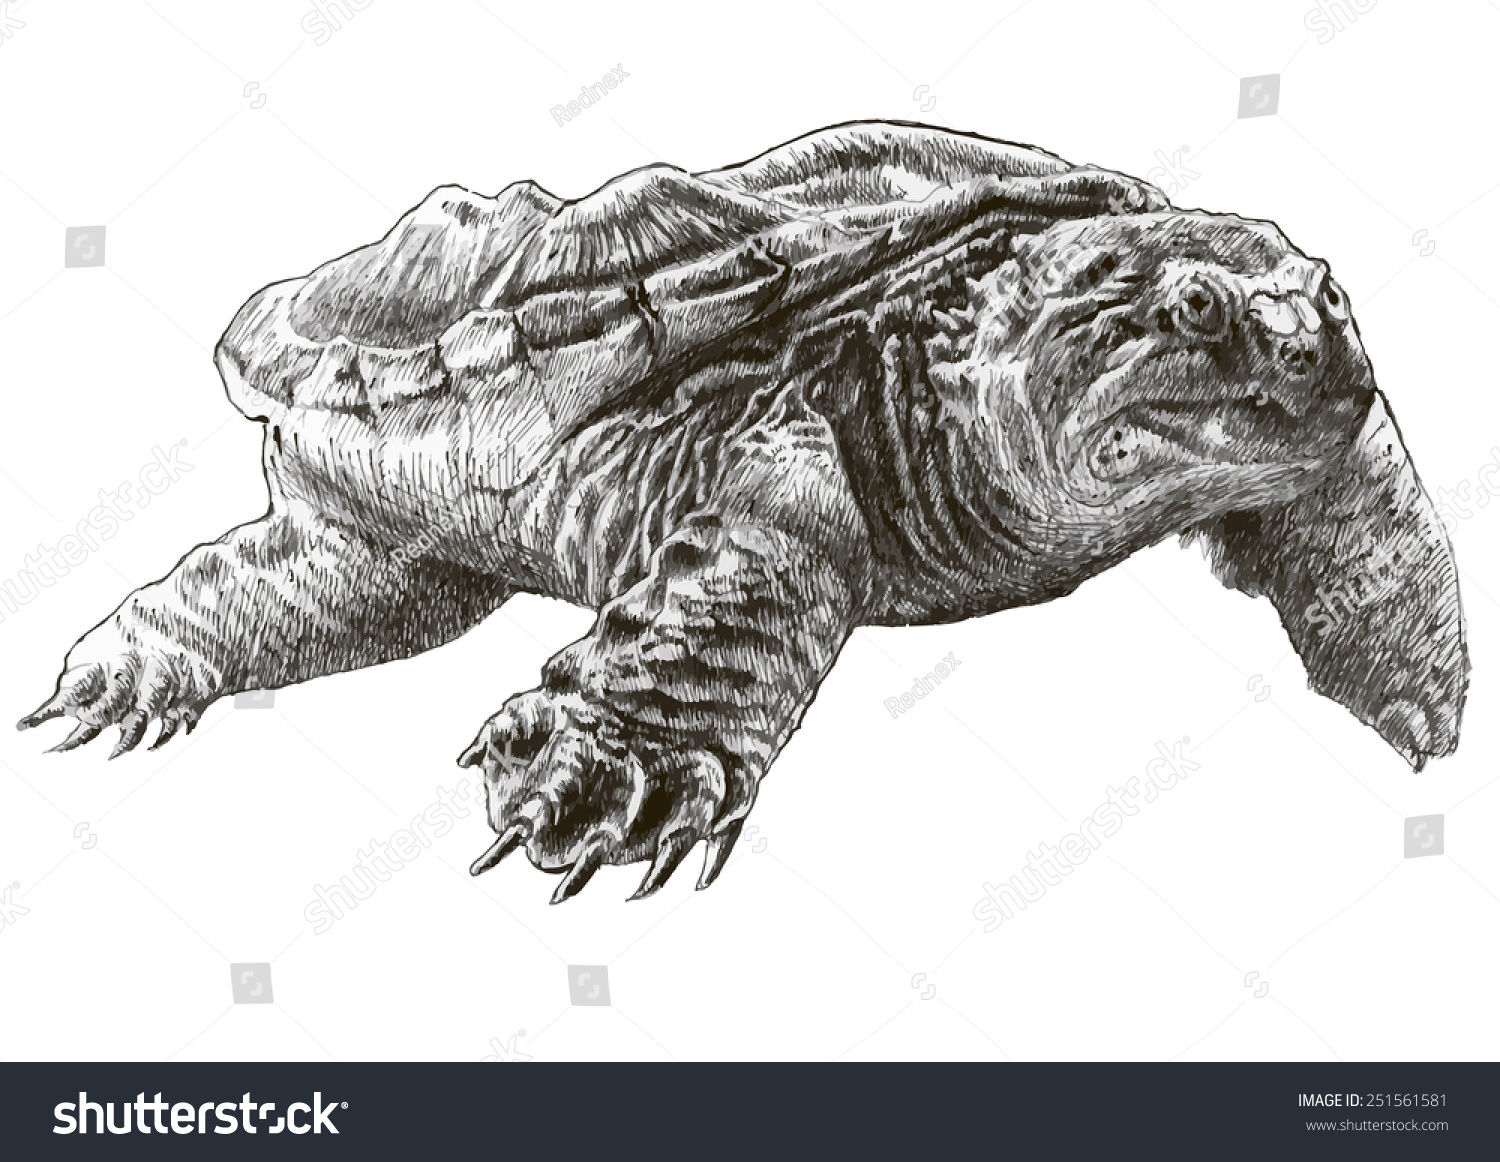 Common Snapping Turtle Hand Drawn Stock Vector 251561581 Shutterstock